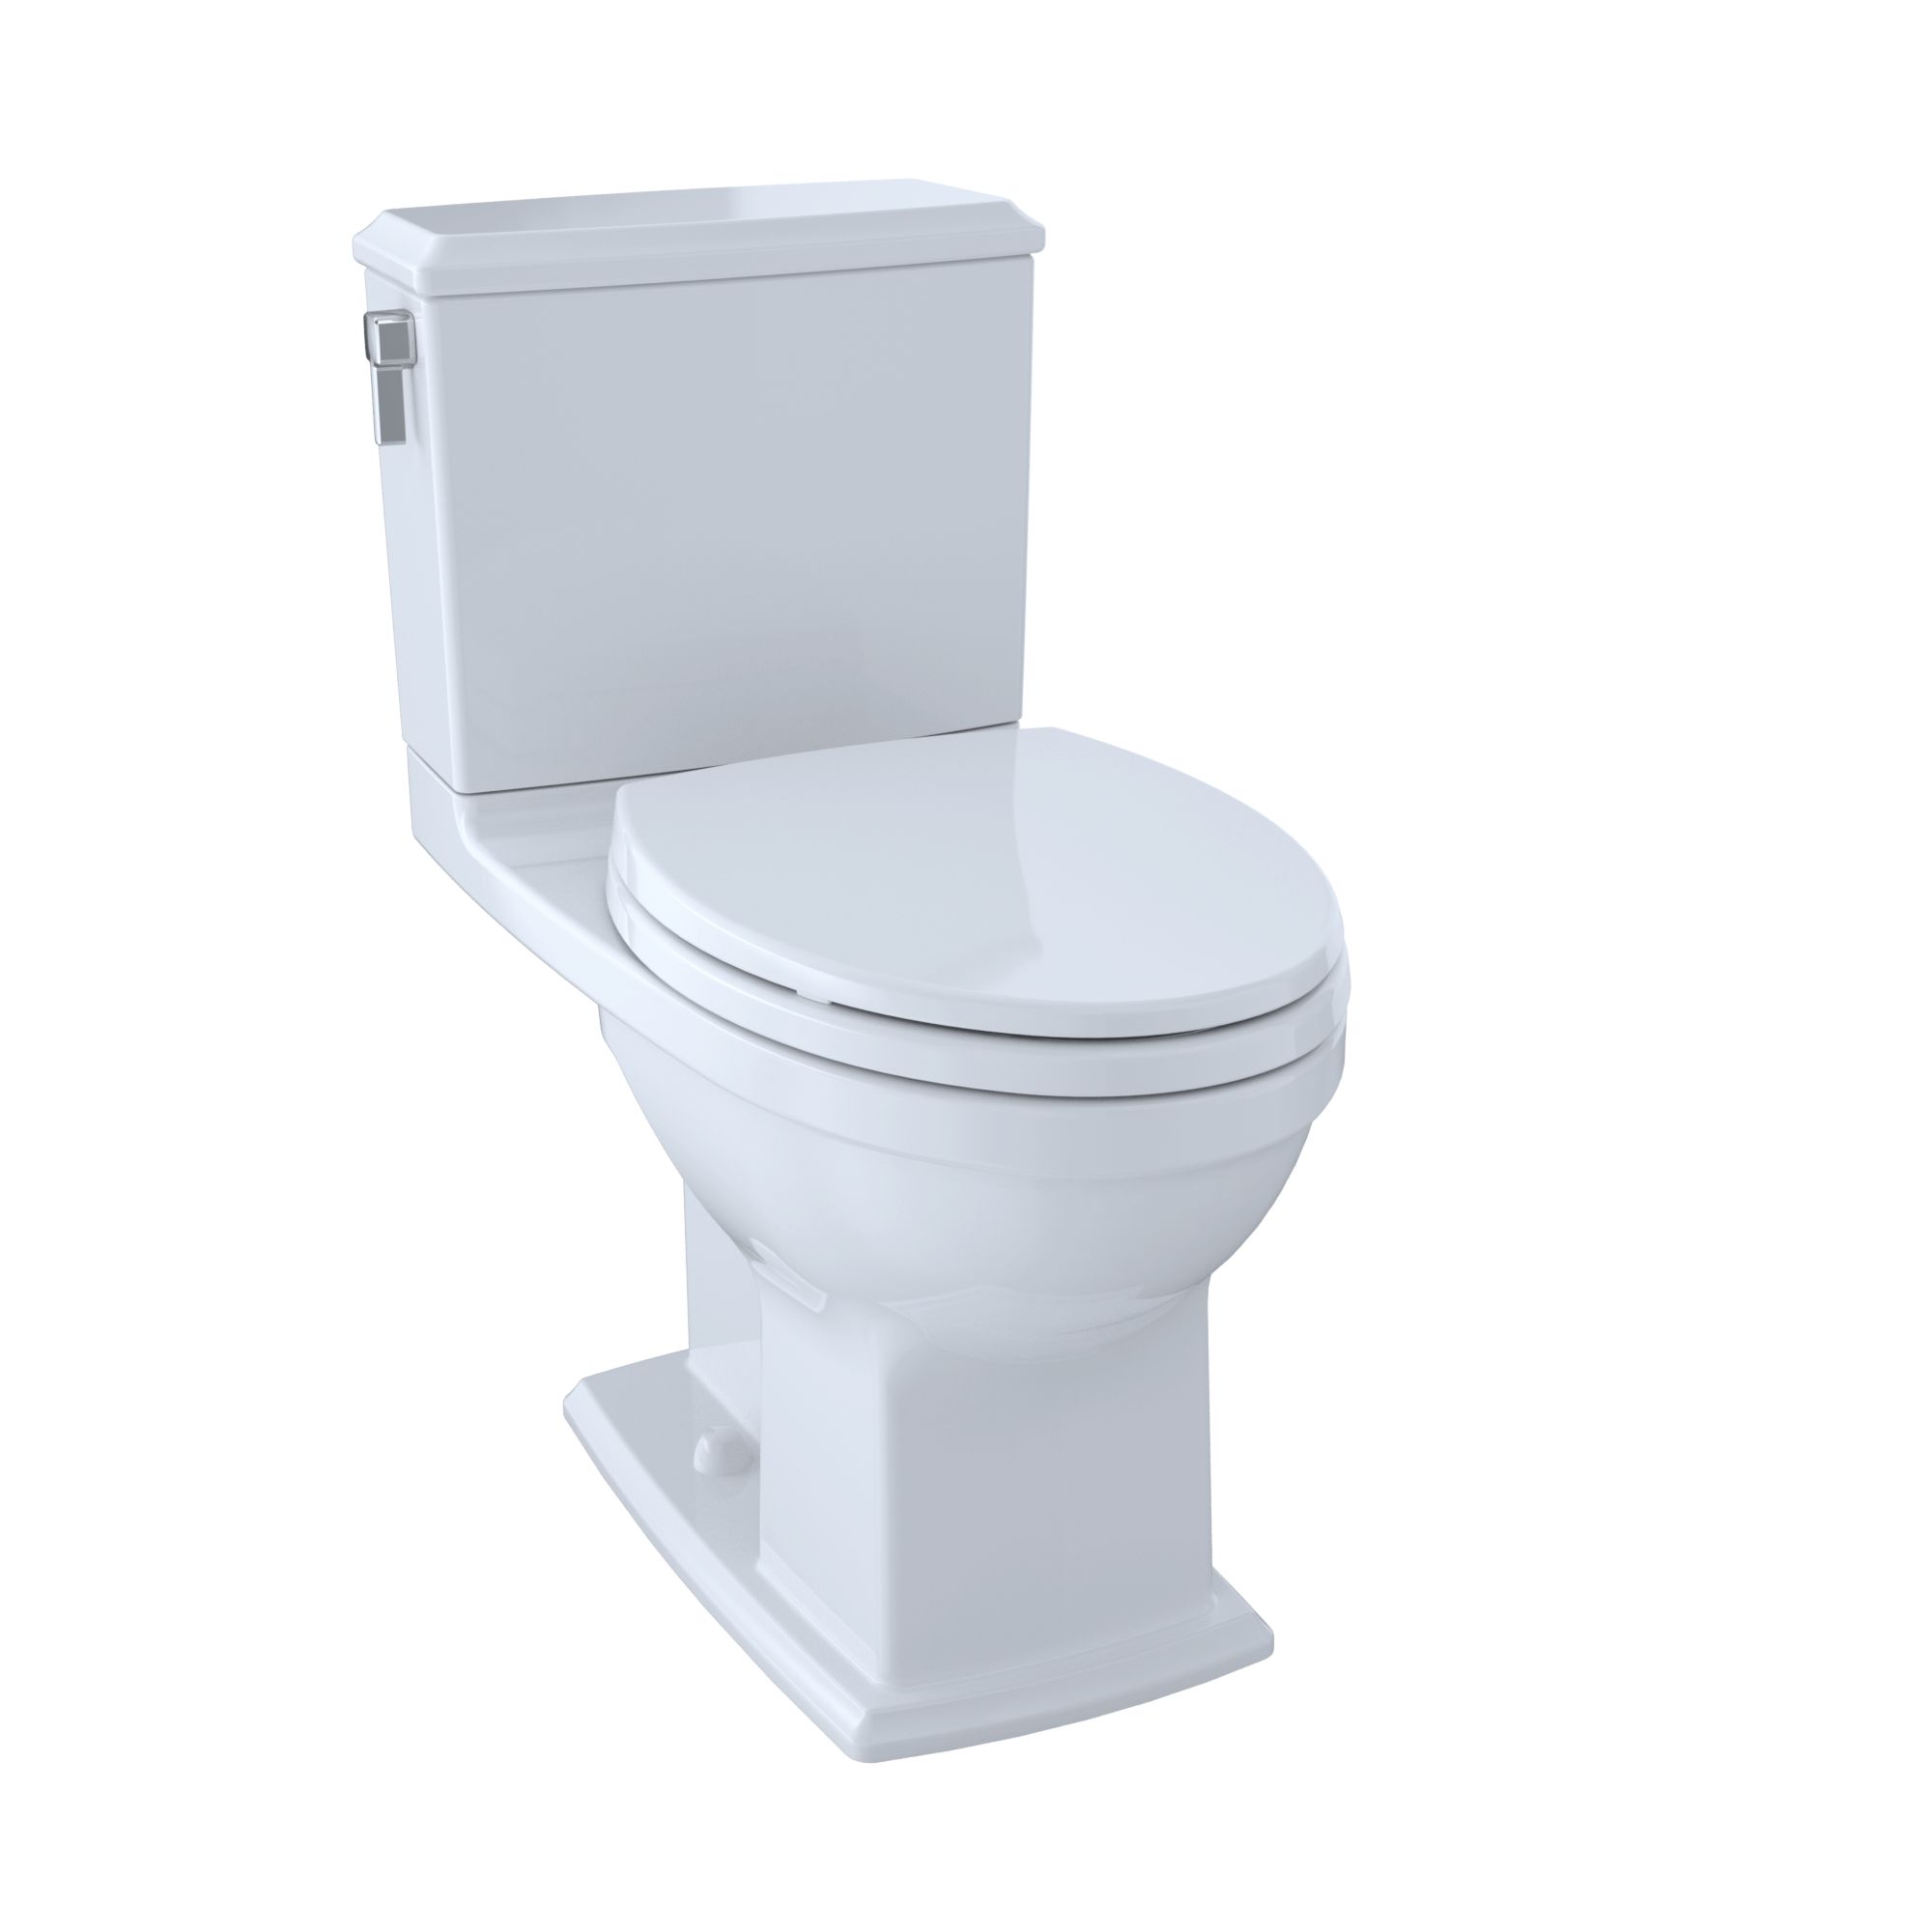 Connelly® Two-Piece Toilet 1.28 GPF & 0.9 GPF, Elongated Bowl